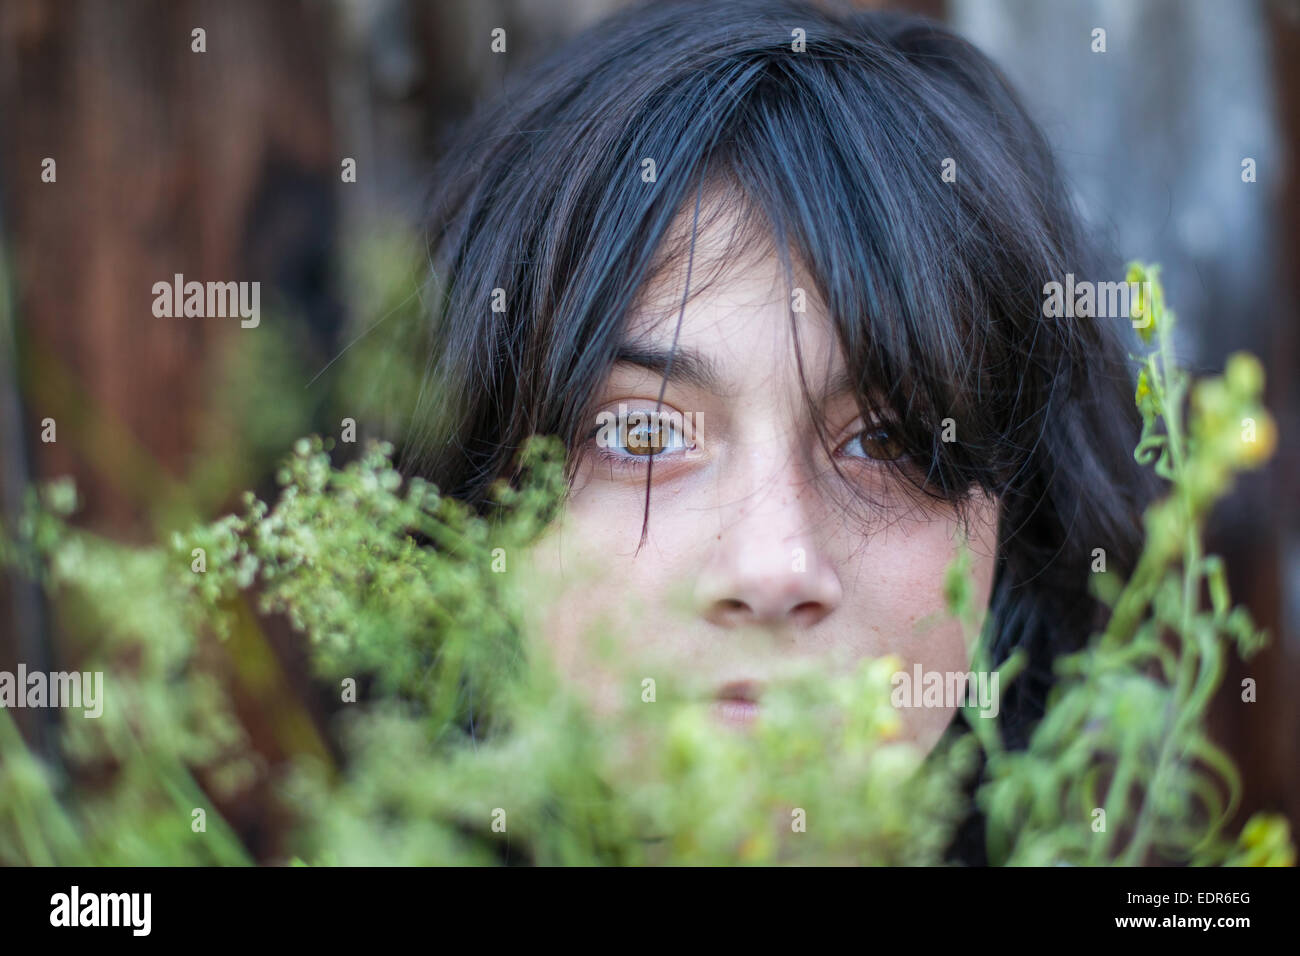 Closeup portrait of black-haired teen girl, hidden in the greenery of the garden. Stock Photo